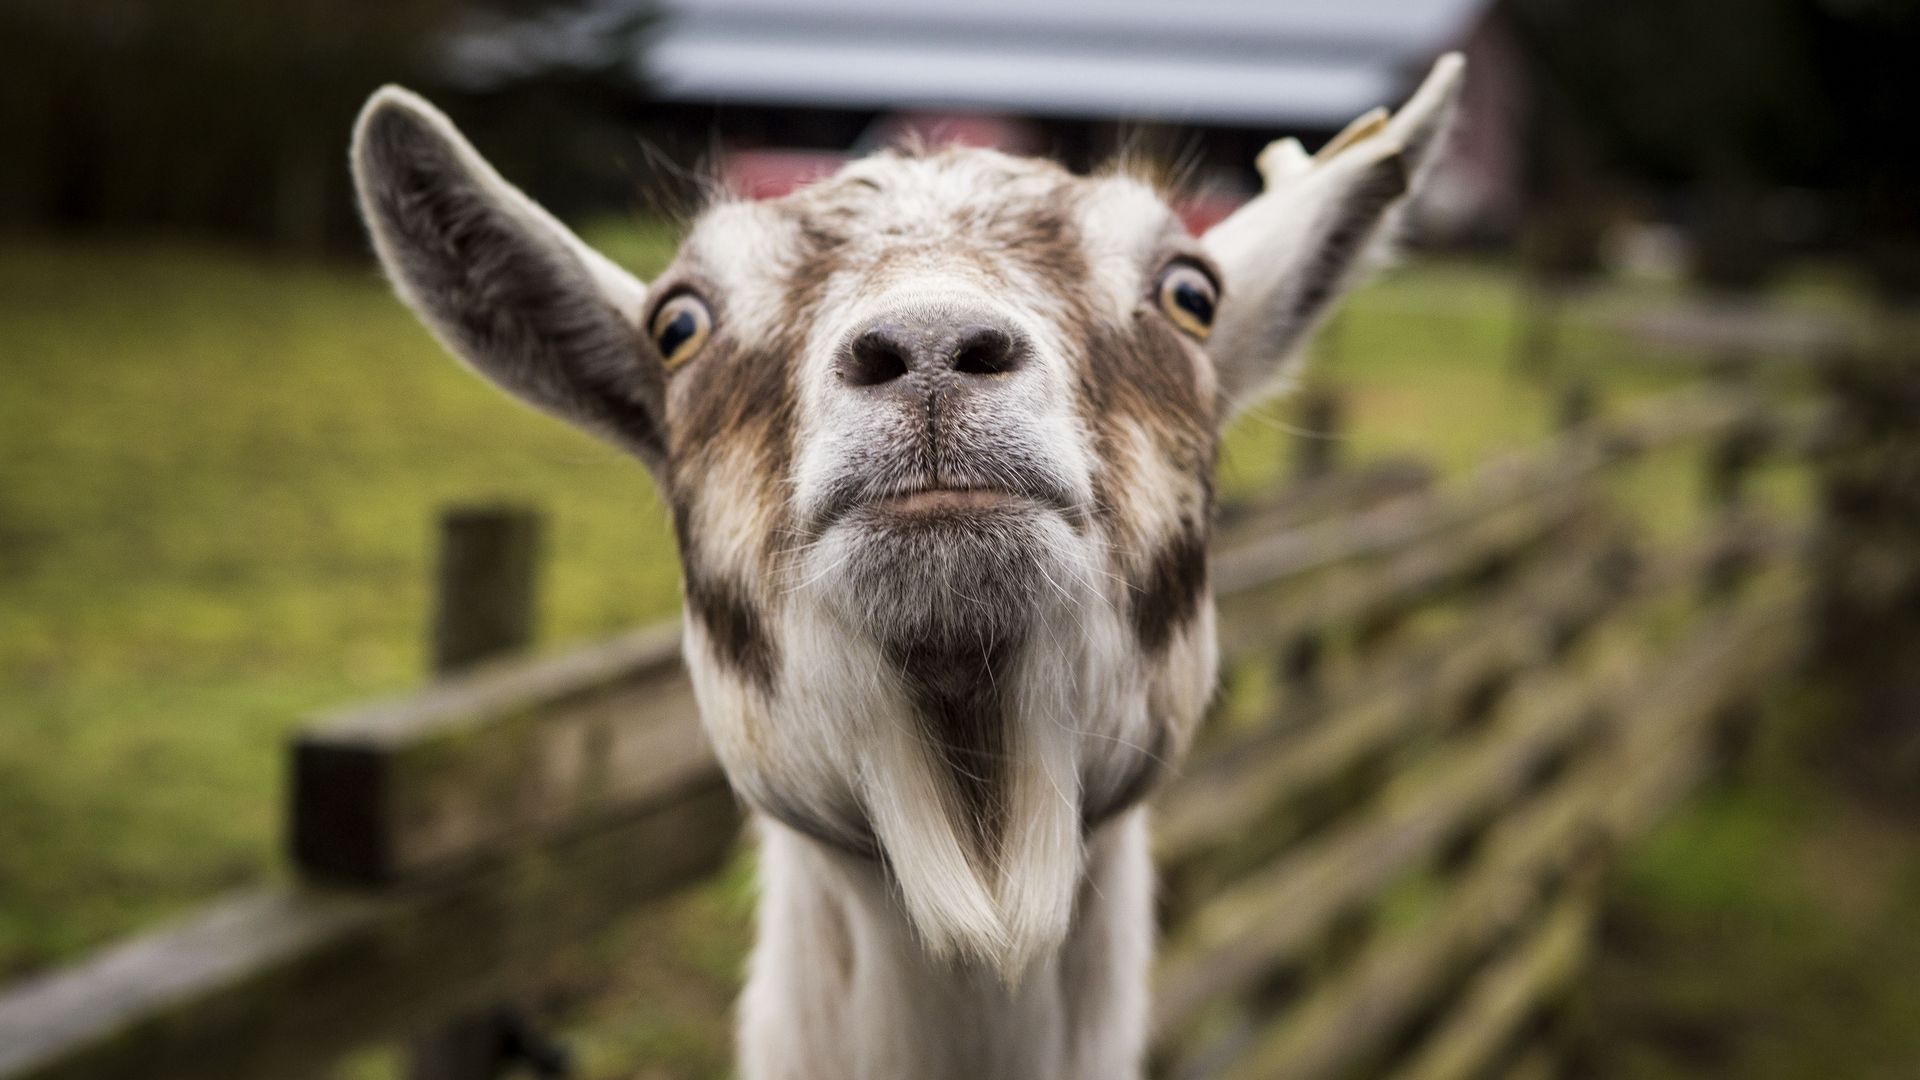 Download wallpaper 1920x1080 goat, muzzle, funny full hd, hdtv, fhd, 1080p  hd background